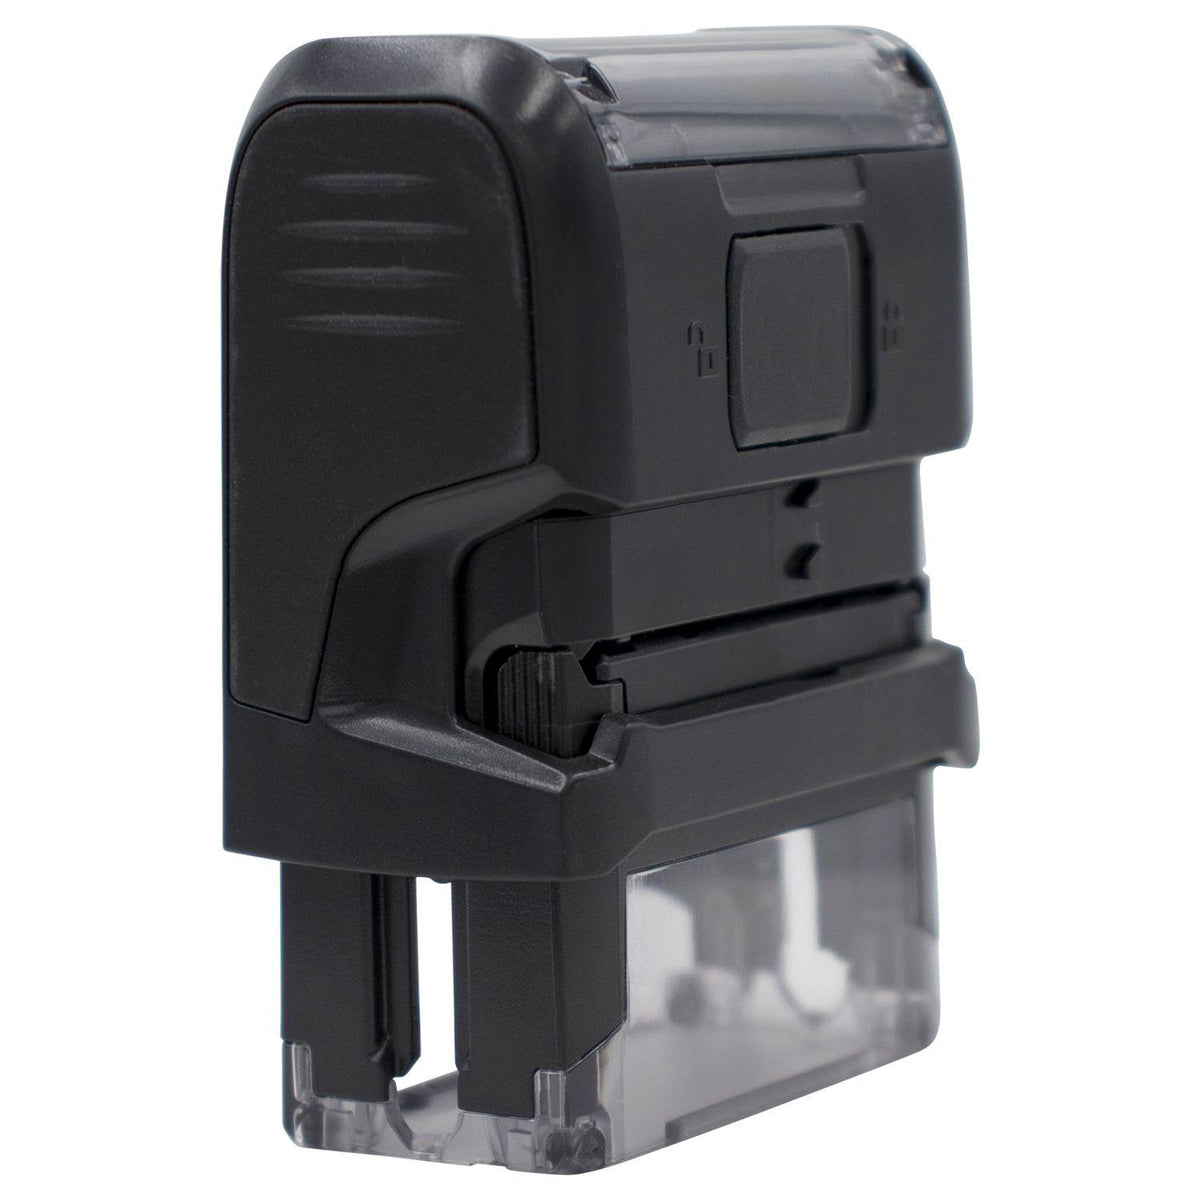 Large Self Inking Petition Stamp - Engineer Seal Stamps - Brand_Trodat, Impression Size_Large, Stamp Type_Self-Inking Stamp, Type of Use_Legal, Type of Use_Medical Office